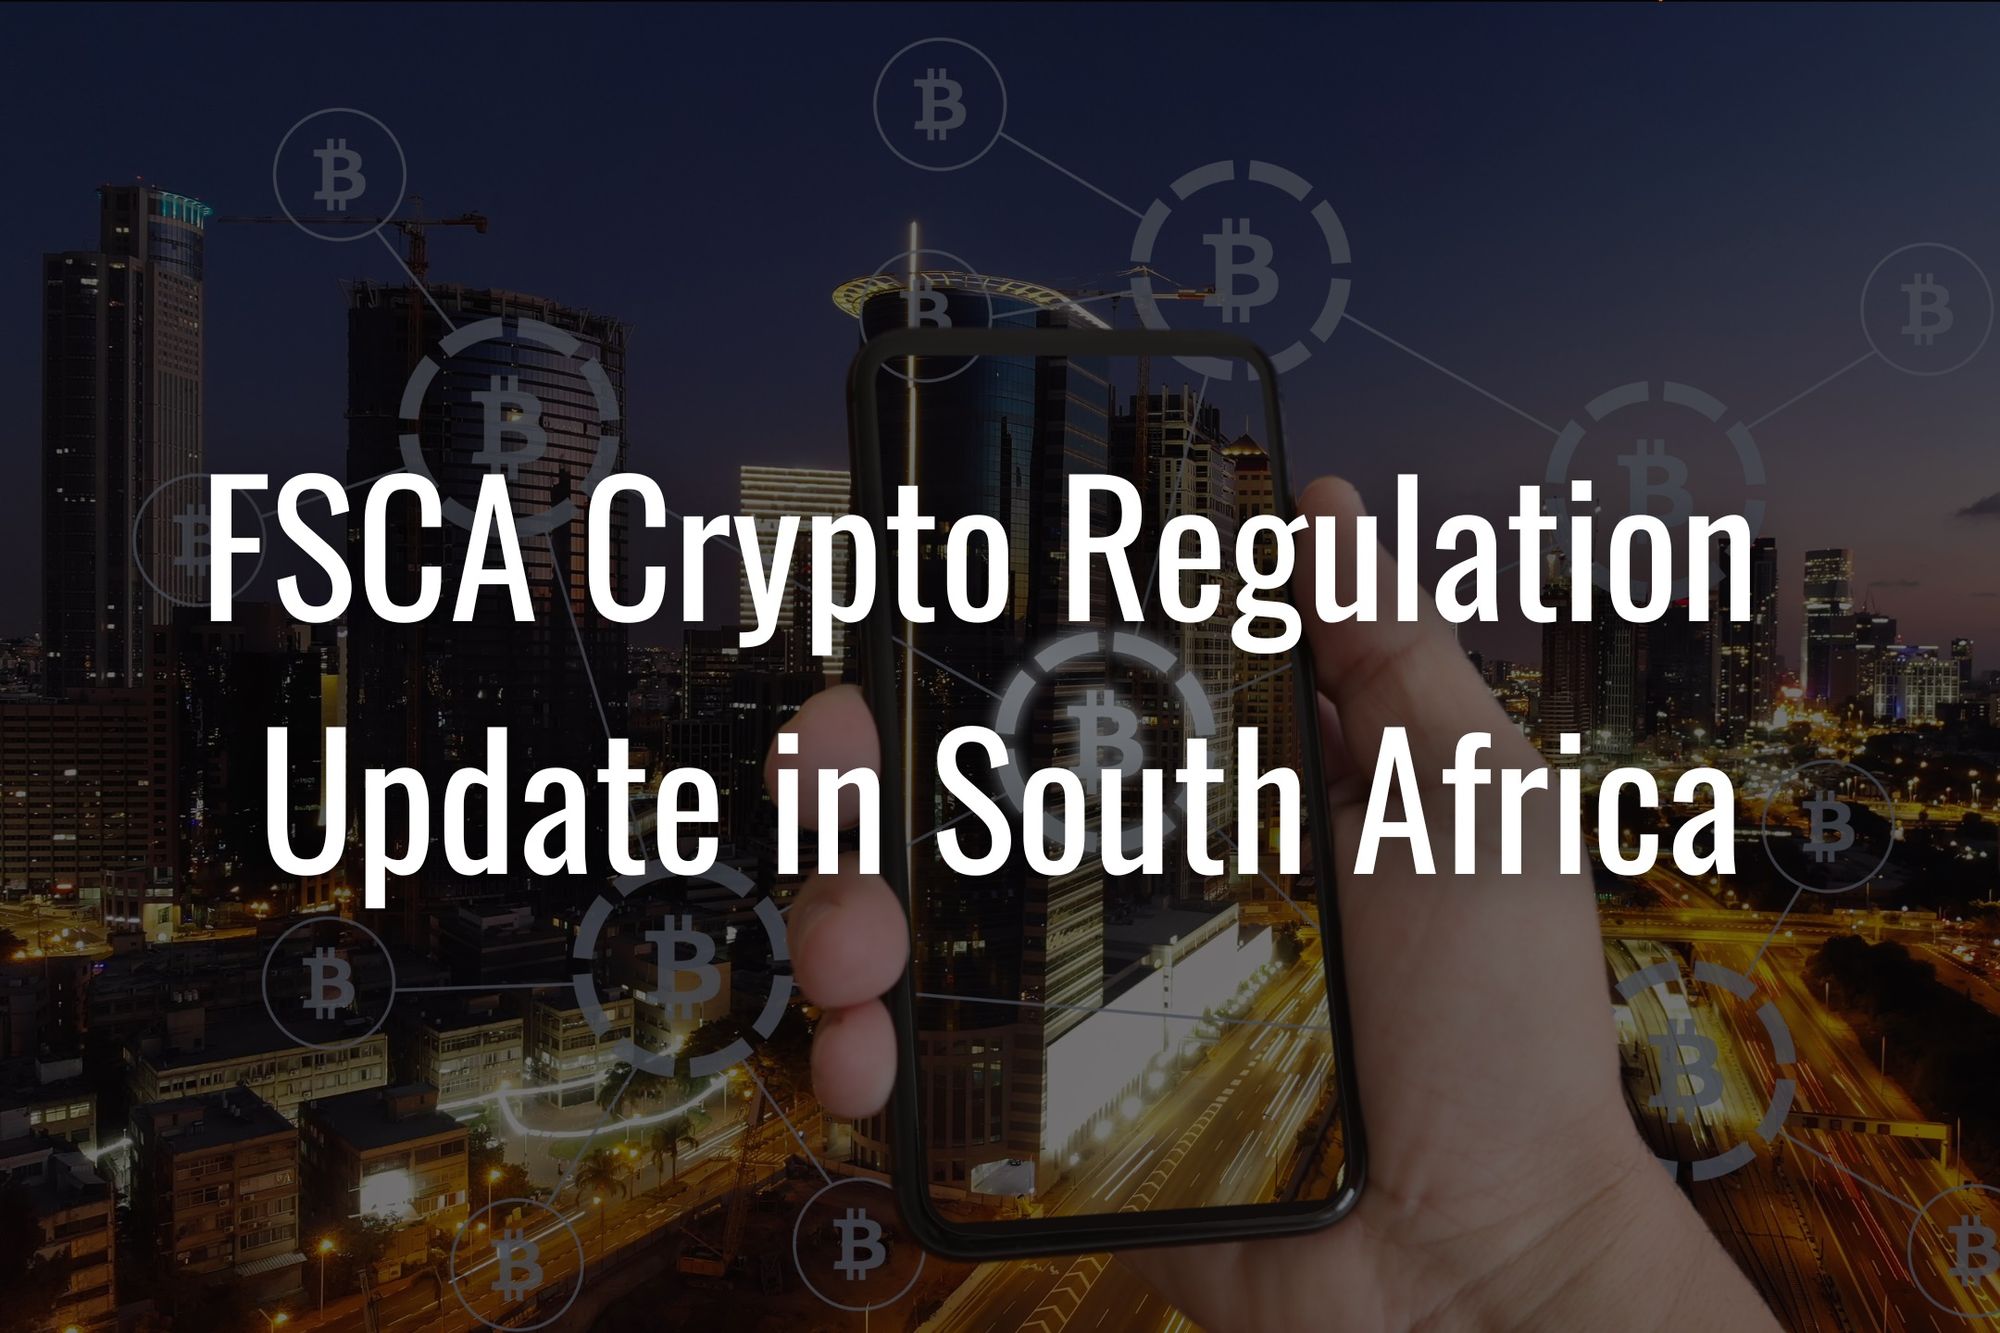 FSCA Crypto Regulation Update in South Africa